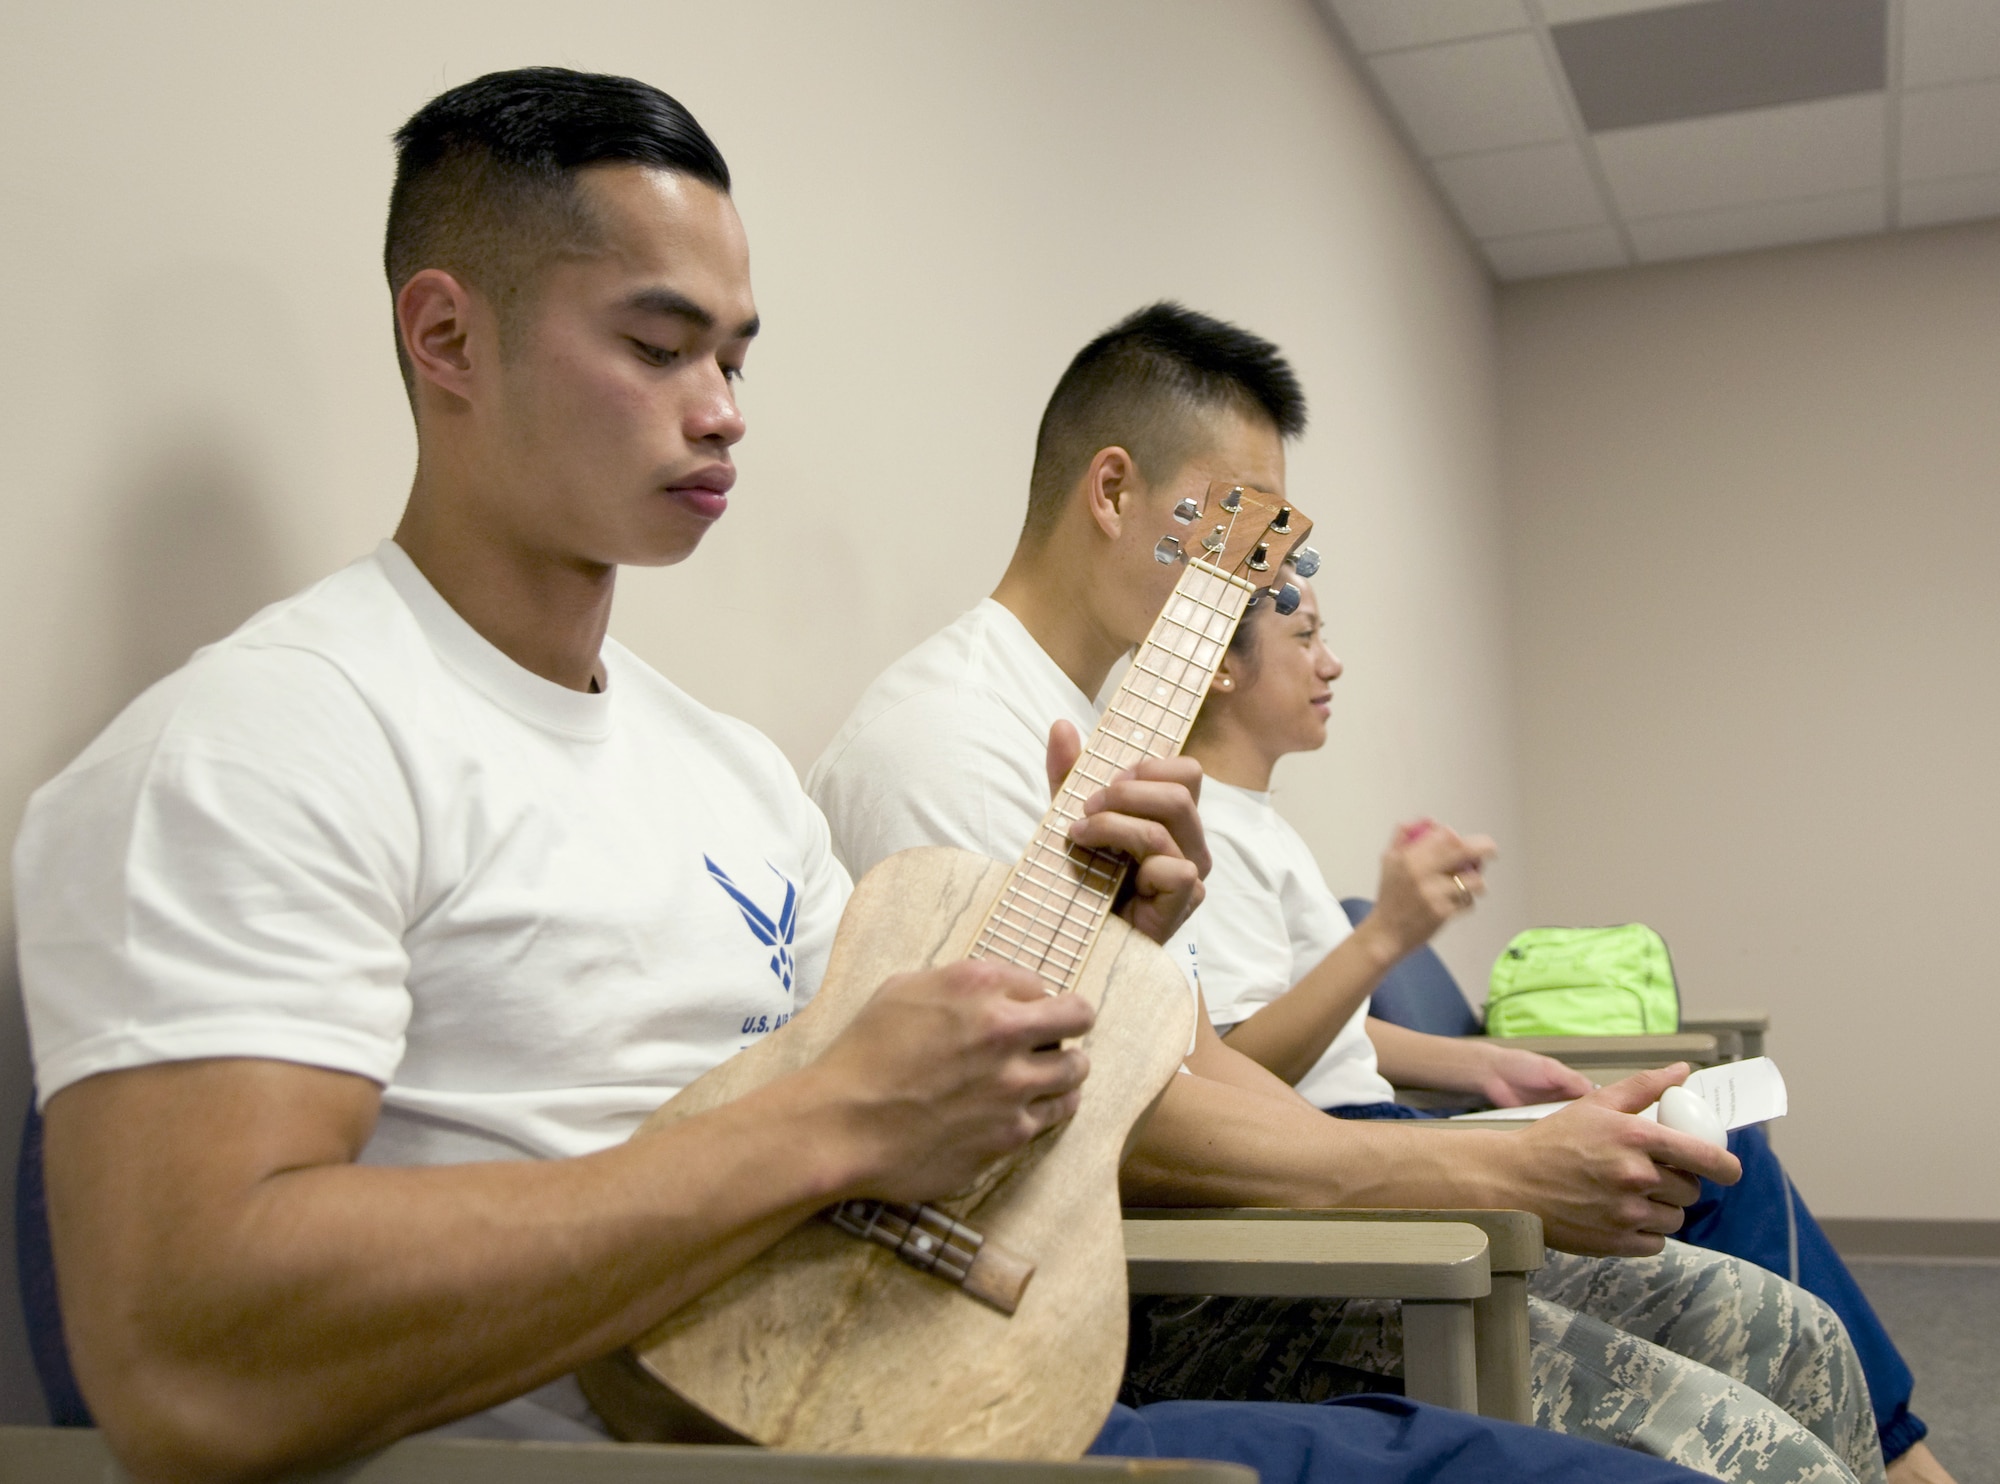 Senior Airman Daryl Jose strums a ukulele during a music therapy session Nov. 19, 2015, on Joint Base Andrews, Md., as part of Warrior CARE Month. Airmen had the chance to use a variety of musical instruments and collaborate on songs in the sessions, which were intended to show wounded warriors a unique approach to therapy. (U.S. Air Force photo/Sean Kimmons)